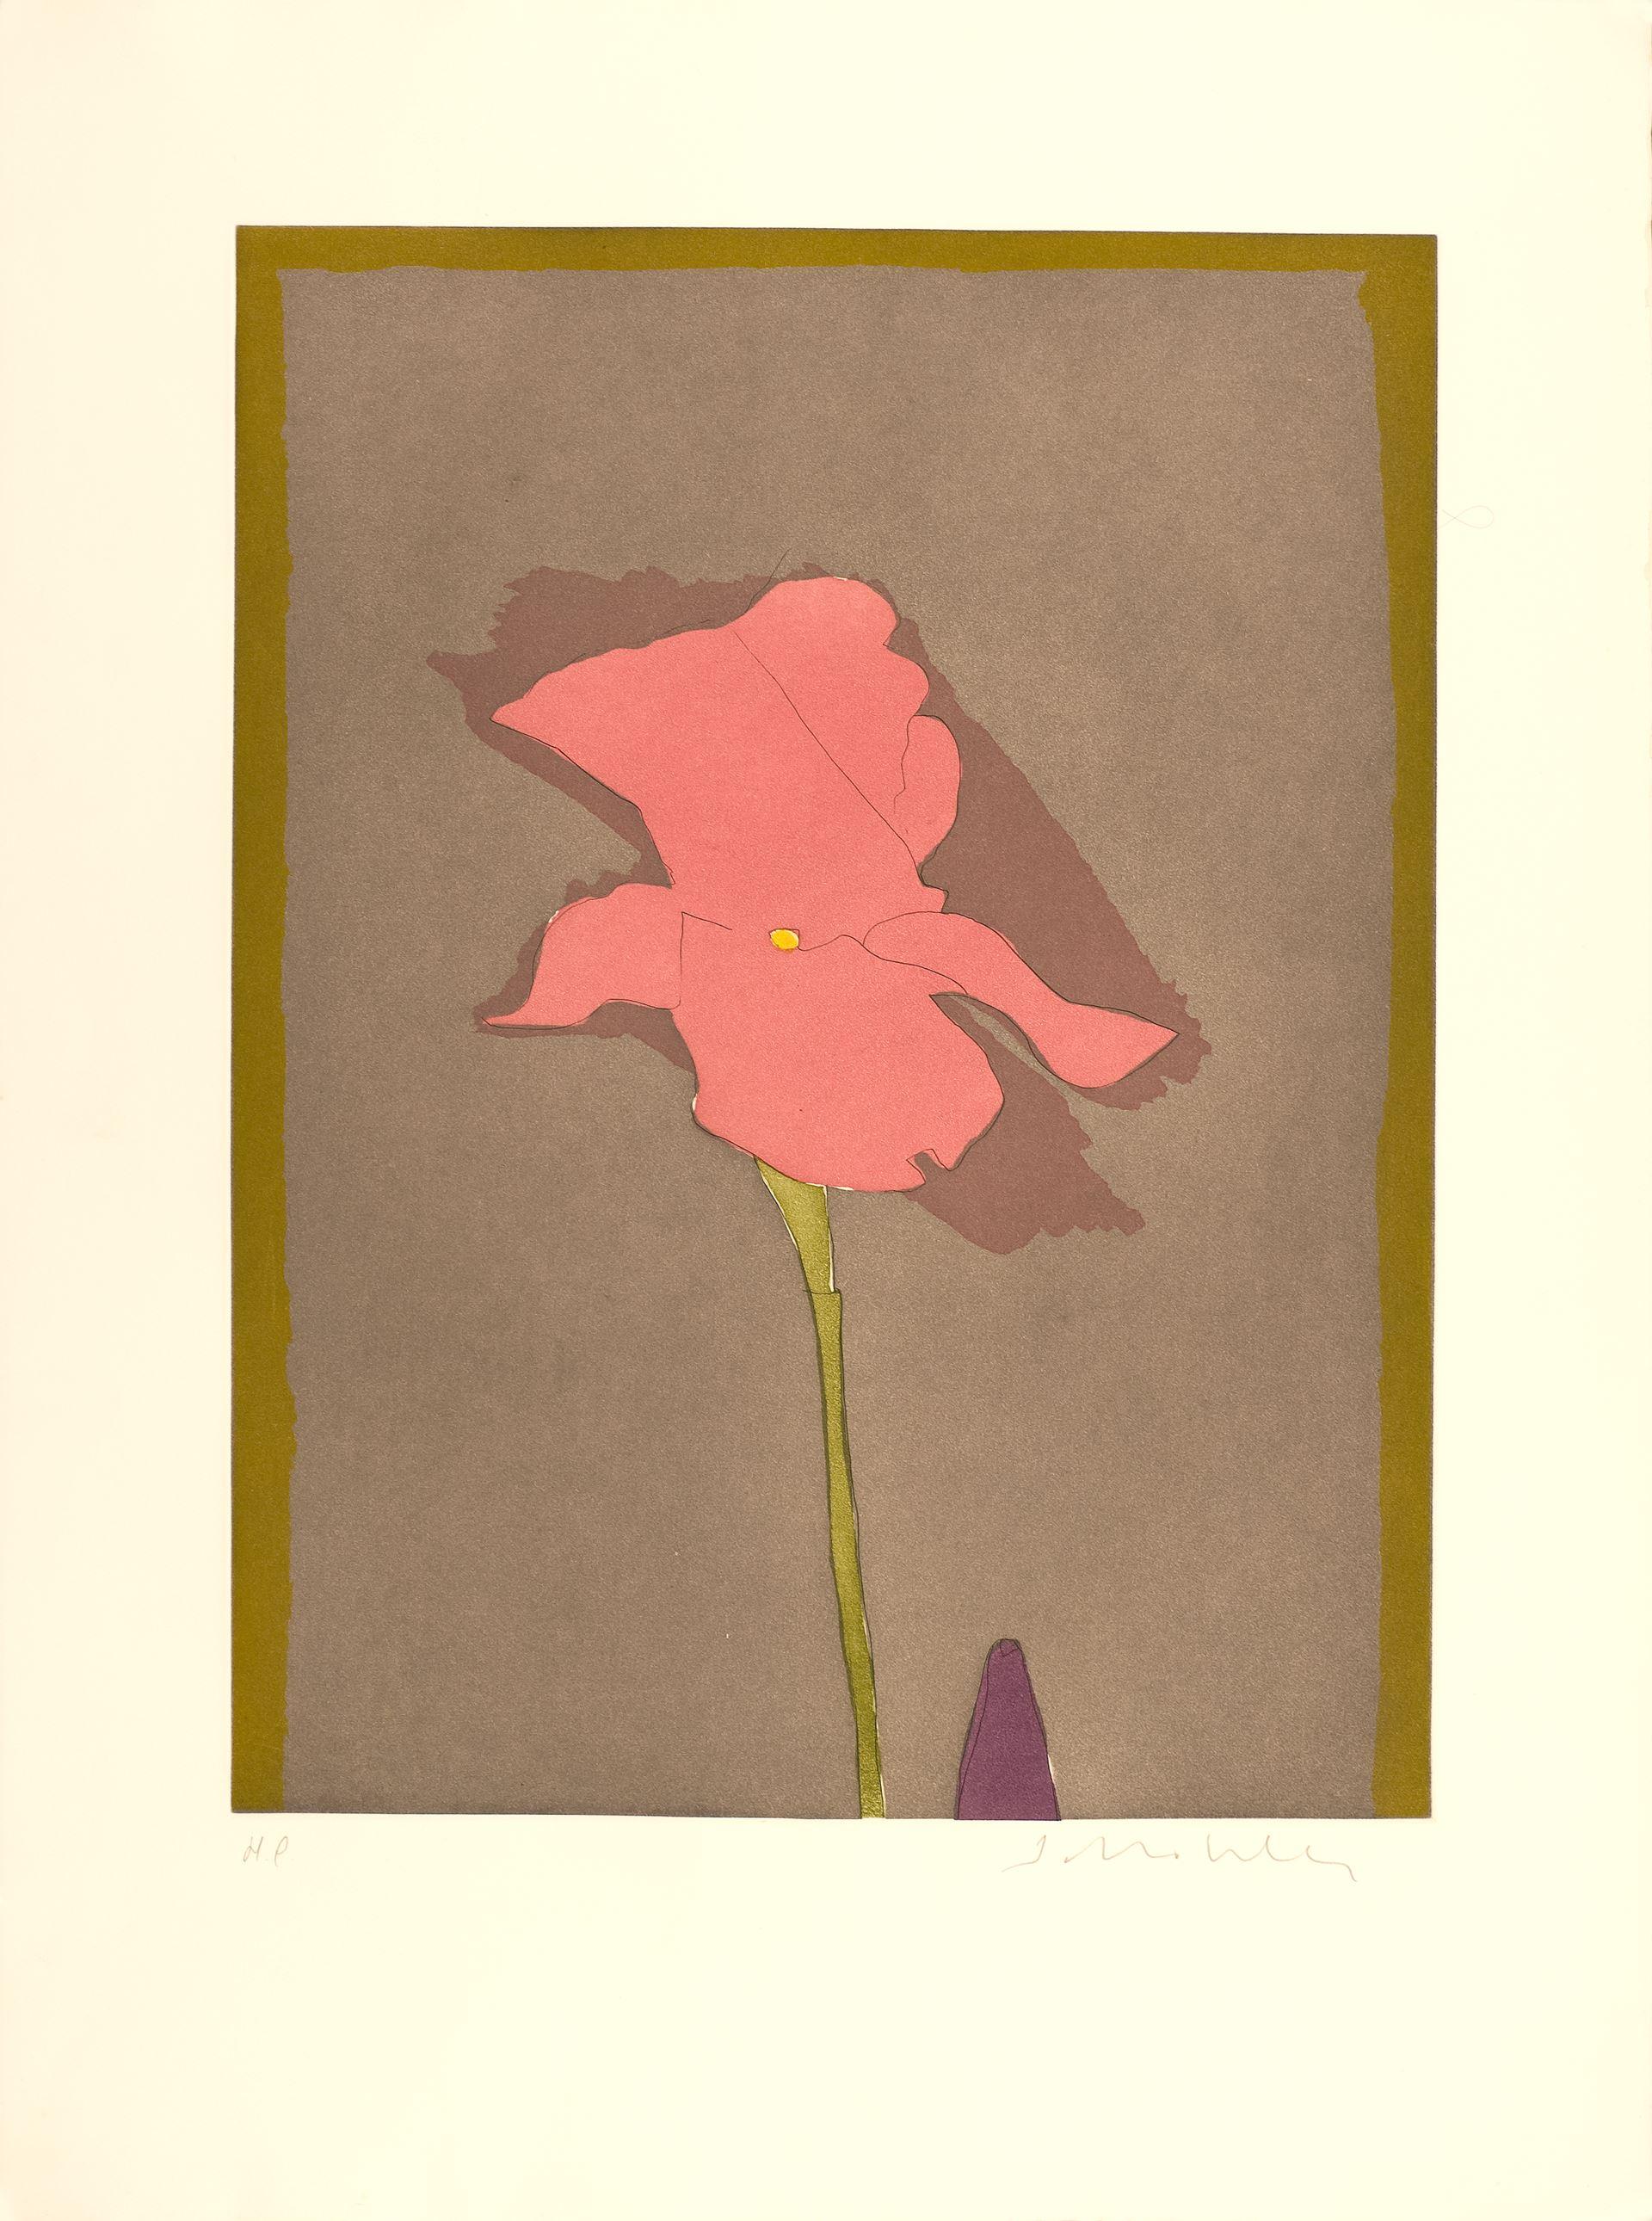 Fritz Scholder (United States, 1937-2005)
'Flower al giverney - 2', 1982
engraving on paper
30 x 22.1 in. (76 x 56 cm.)
ID: SCH1341-001-000
Unframed